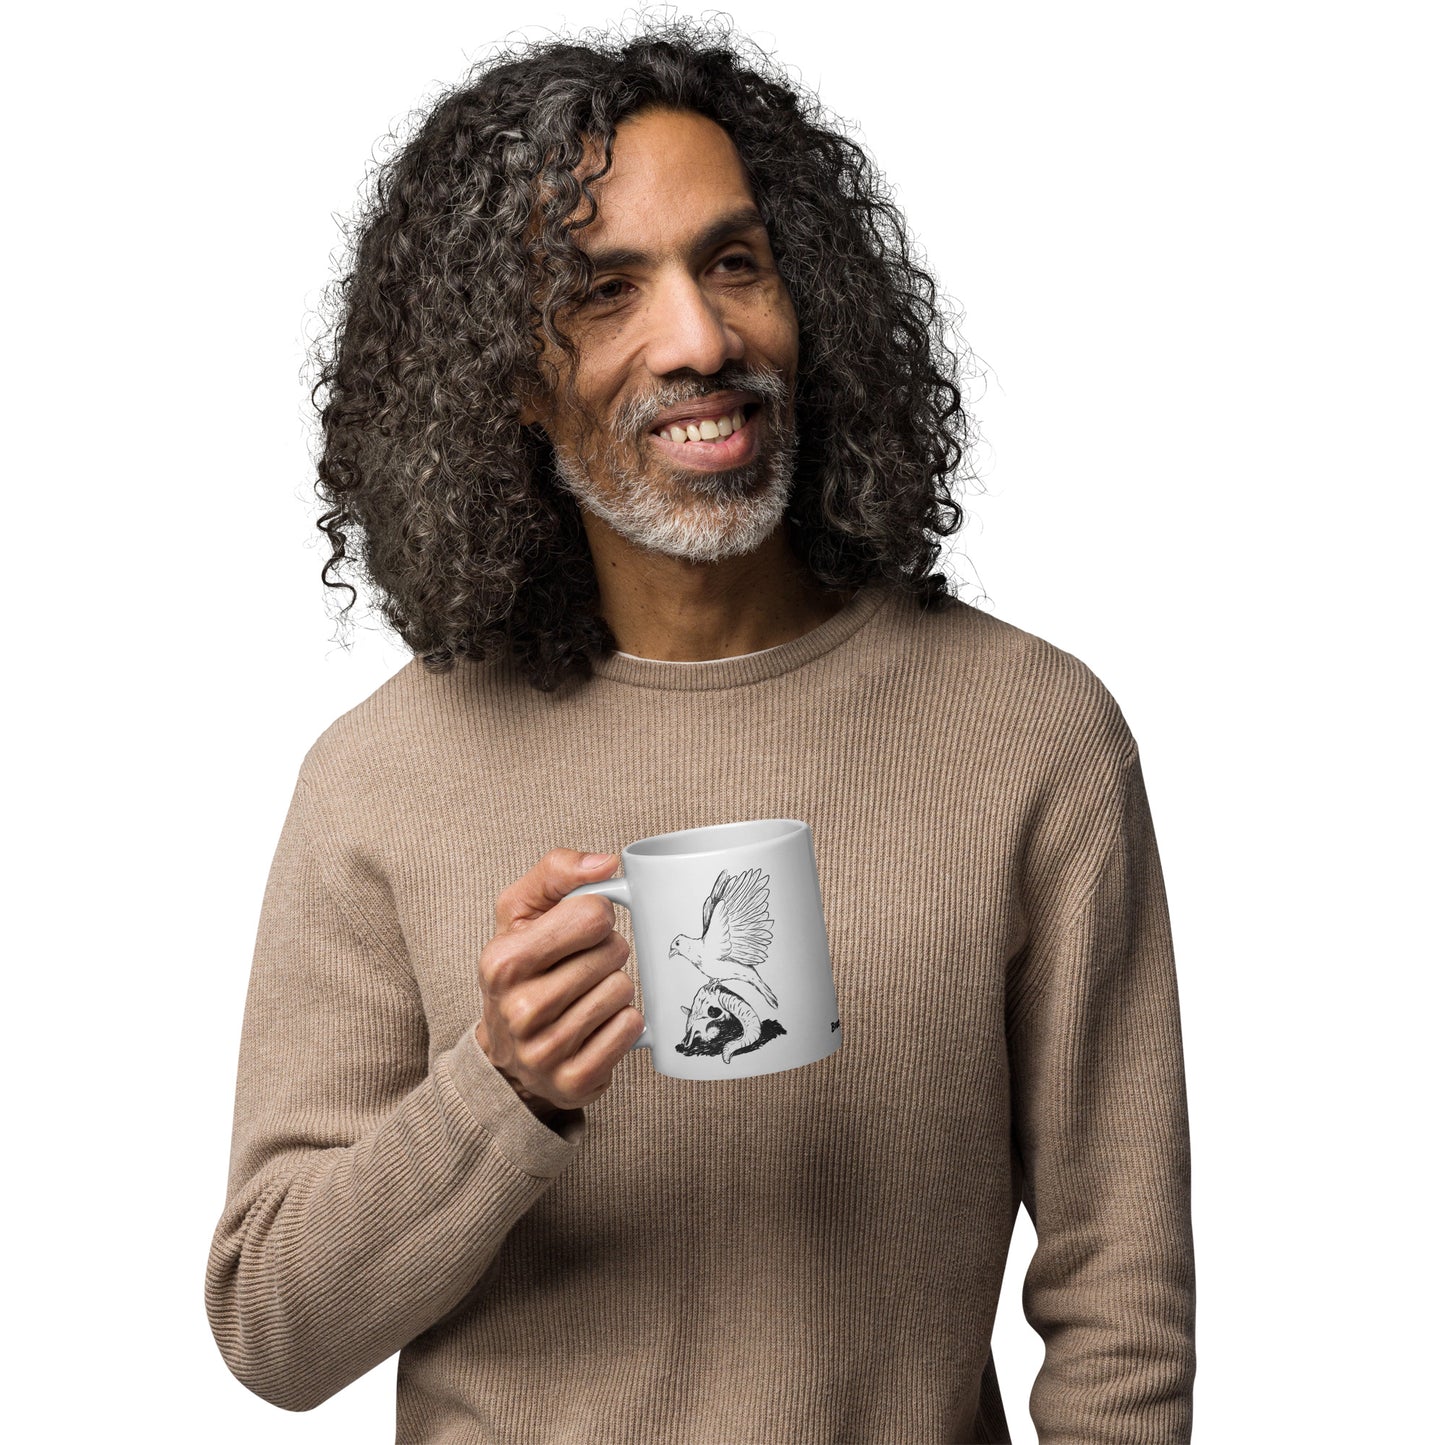 20 ounce white glossy mug featuring double sided print of Reflections, a design with a crow with wings outstretched on a sheep skull. Shown in male model's hands.